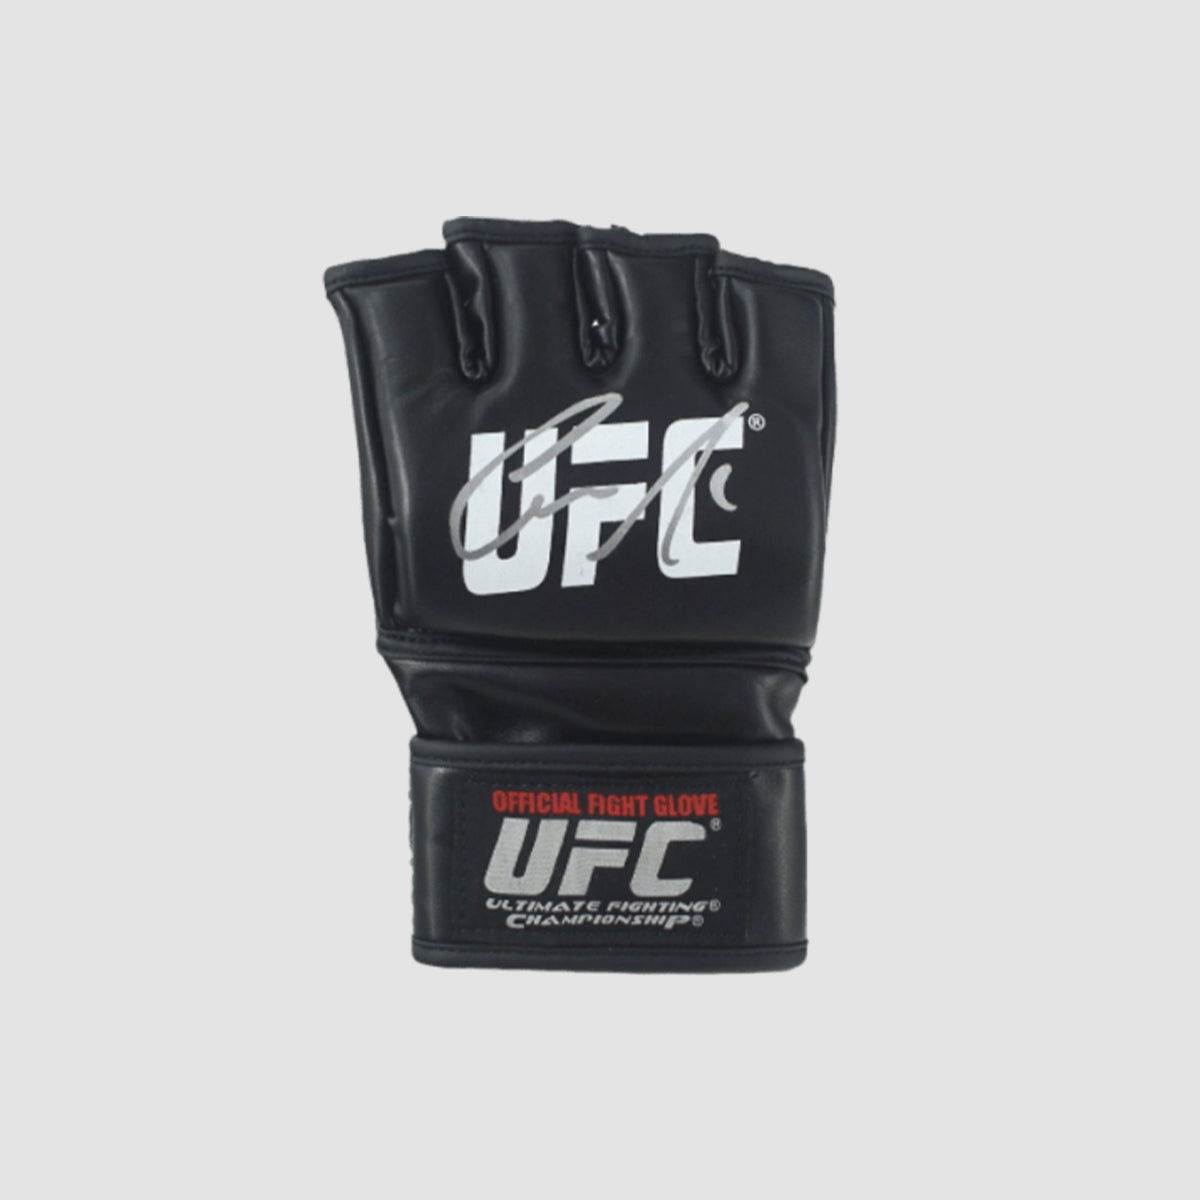 Conor McGregor Signed UFC Glove (Boxed)